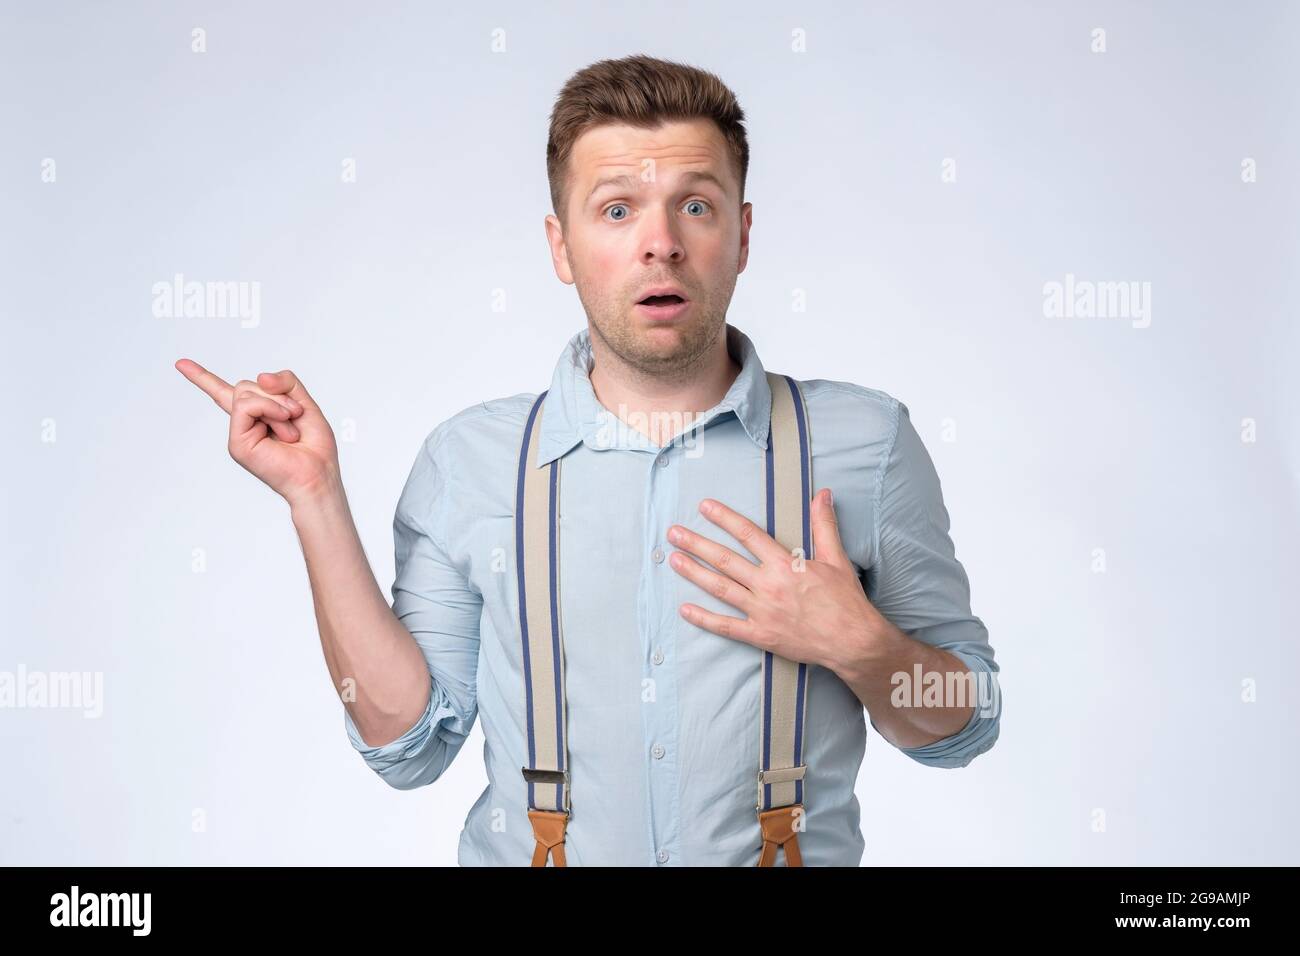 Young bewildered man pointing hands aside, looking camera. Stock Photo